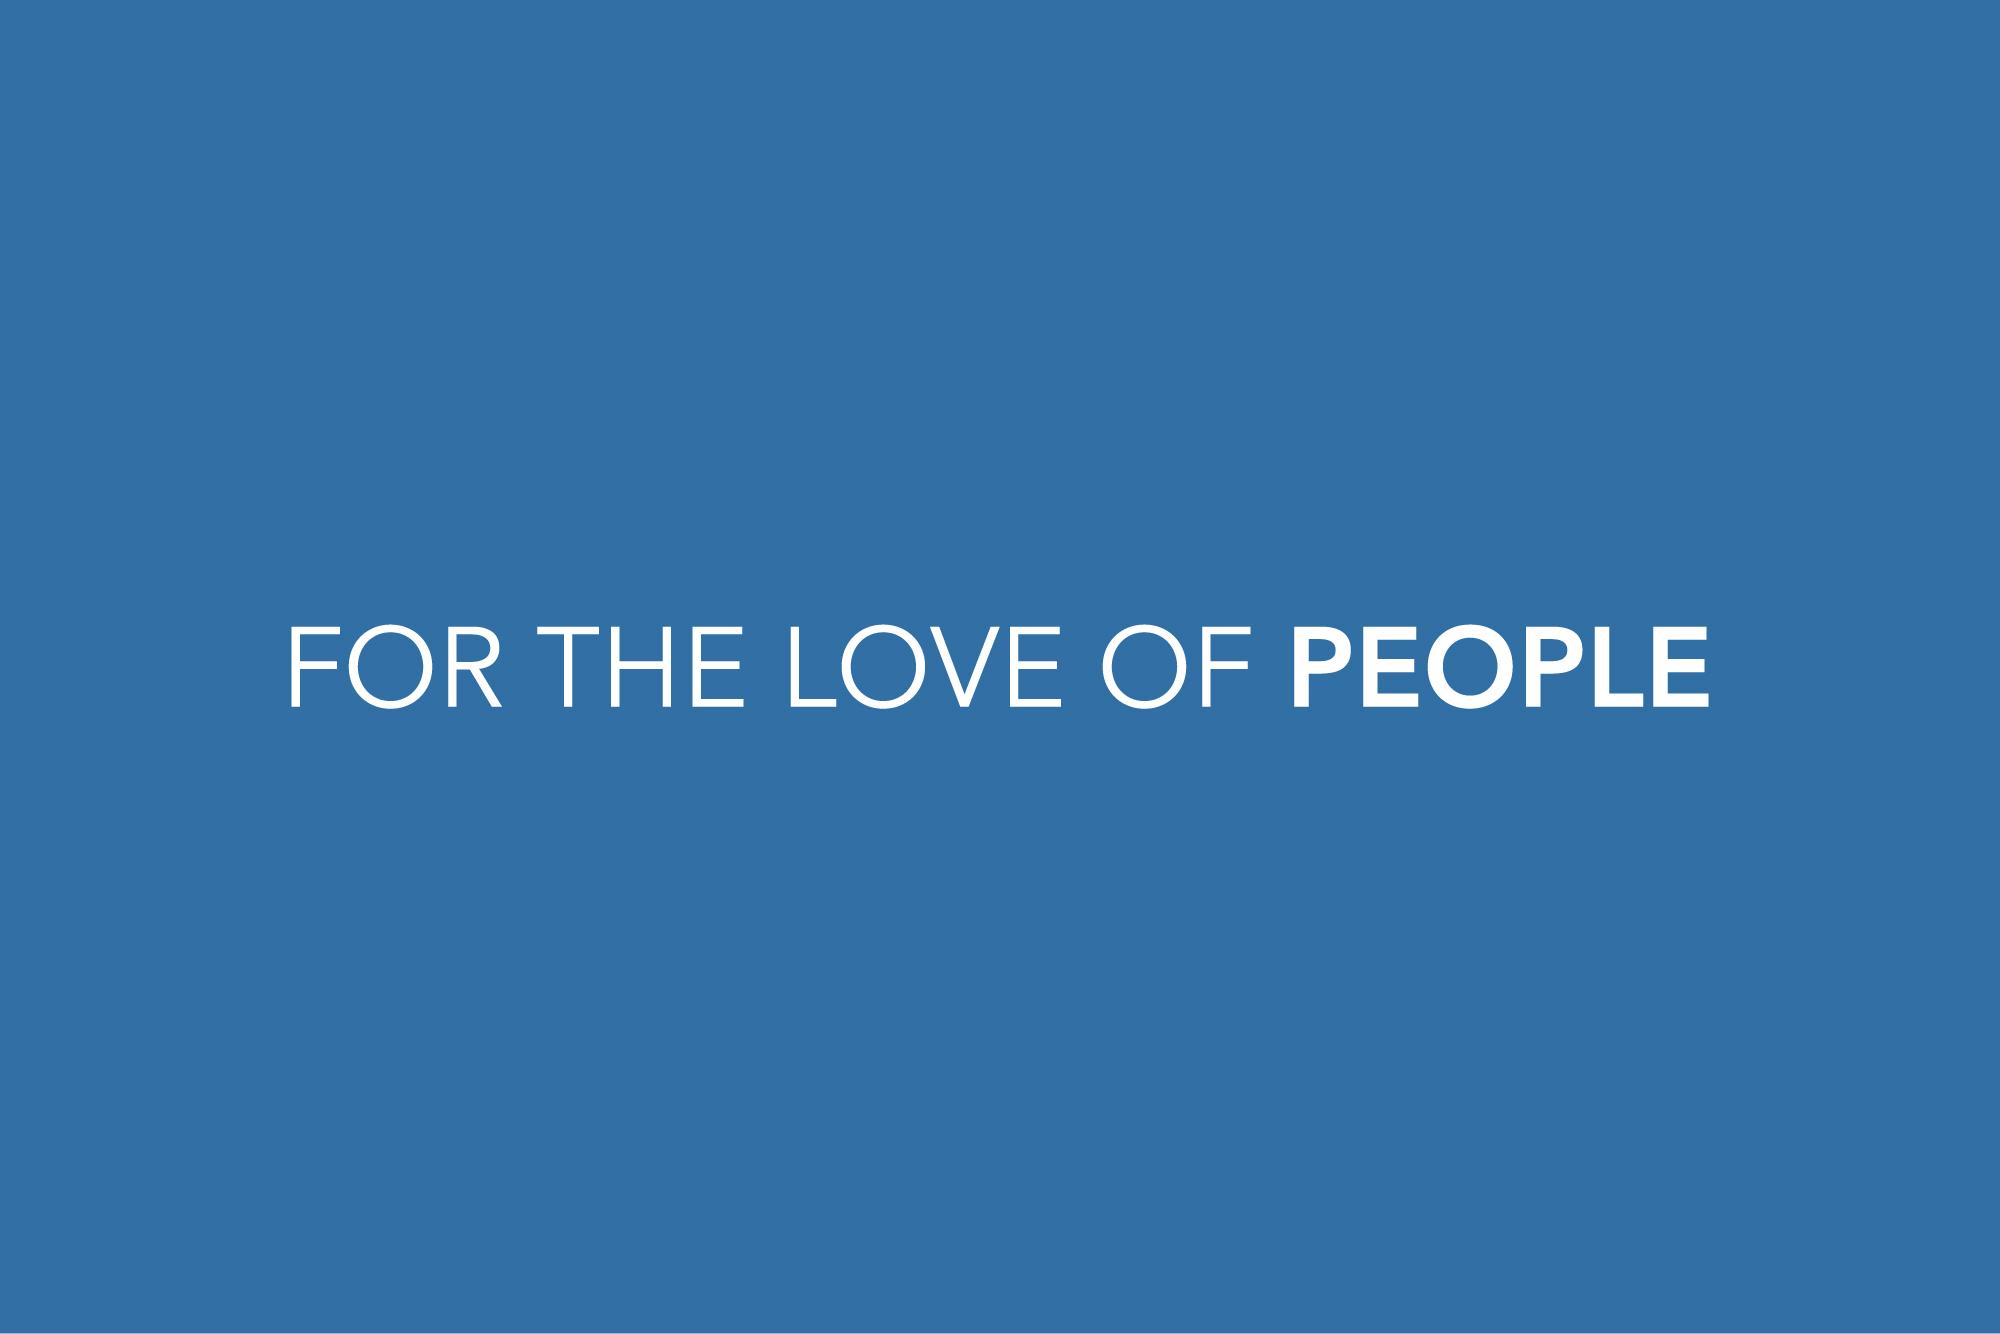 Tagline: For the Love of People